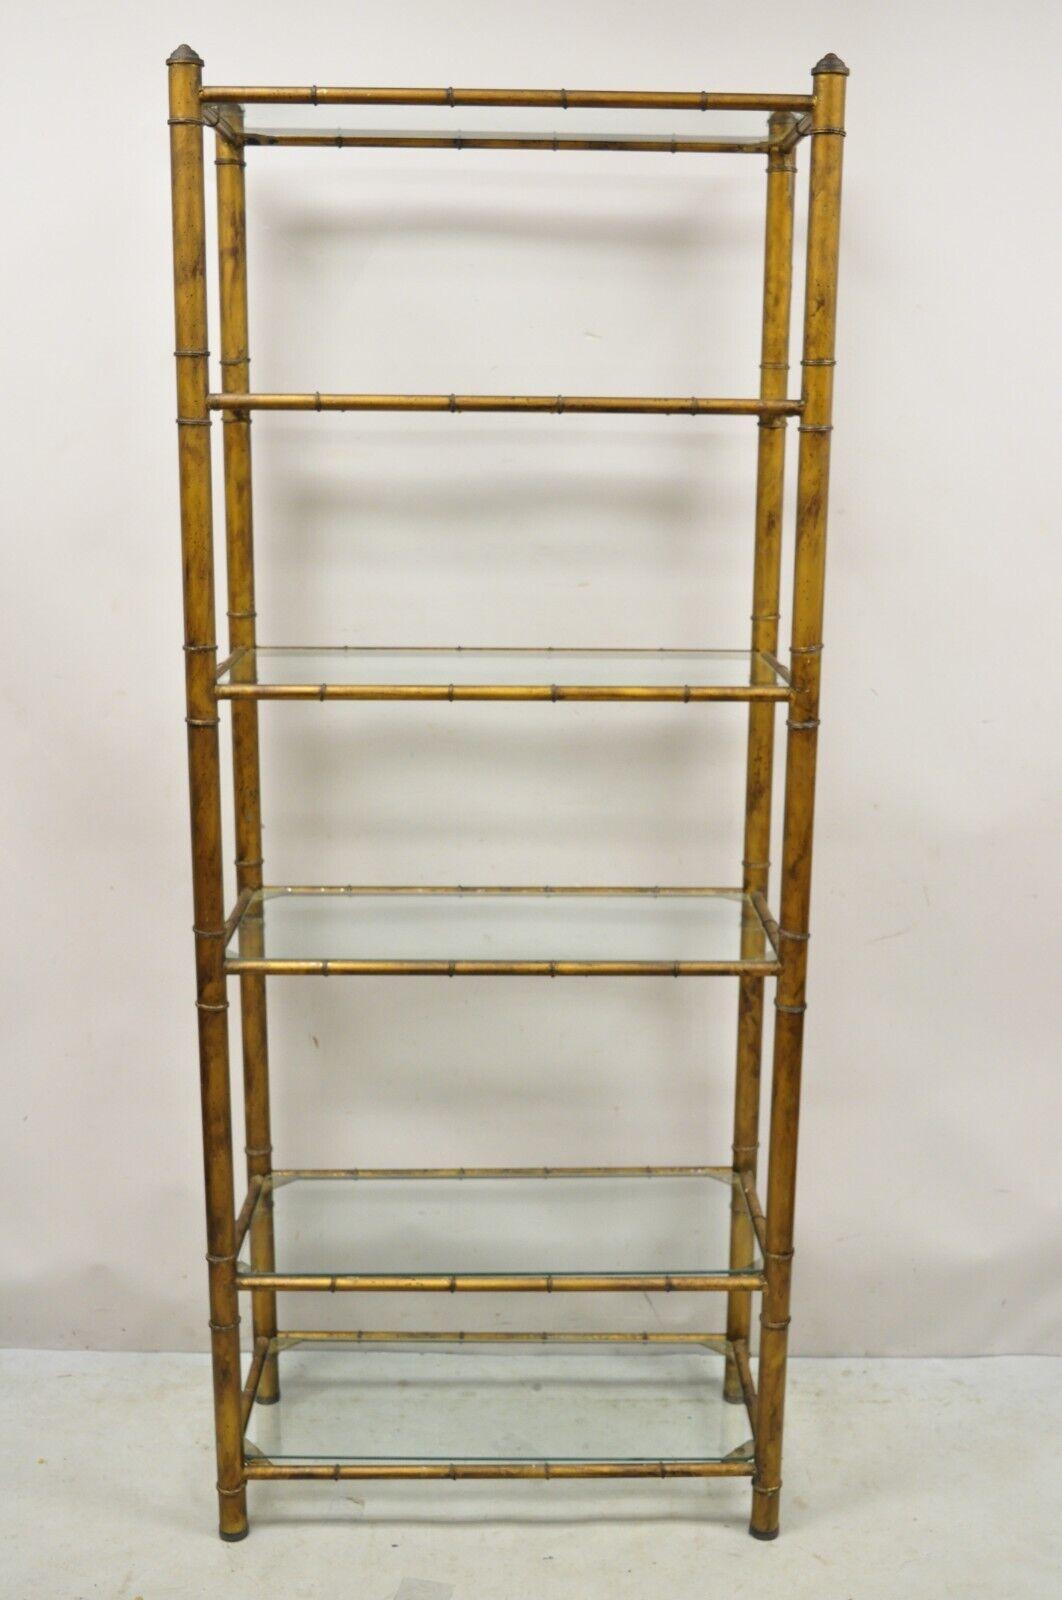 Vintage Hollywood Regency Faux Bamboo Steel Metal Gold 6 Tier Etagere Shelf Bookcase. Item features a steel metal faux bamboo design frame, 6 glass shelves, dark gold distress painted finish, very nice vintage item, great style and form. Circa Mid